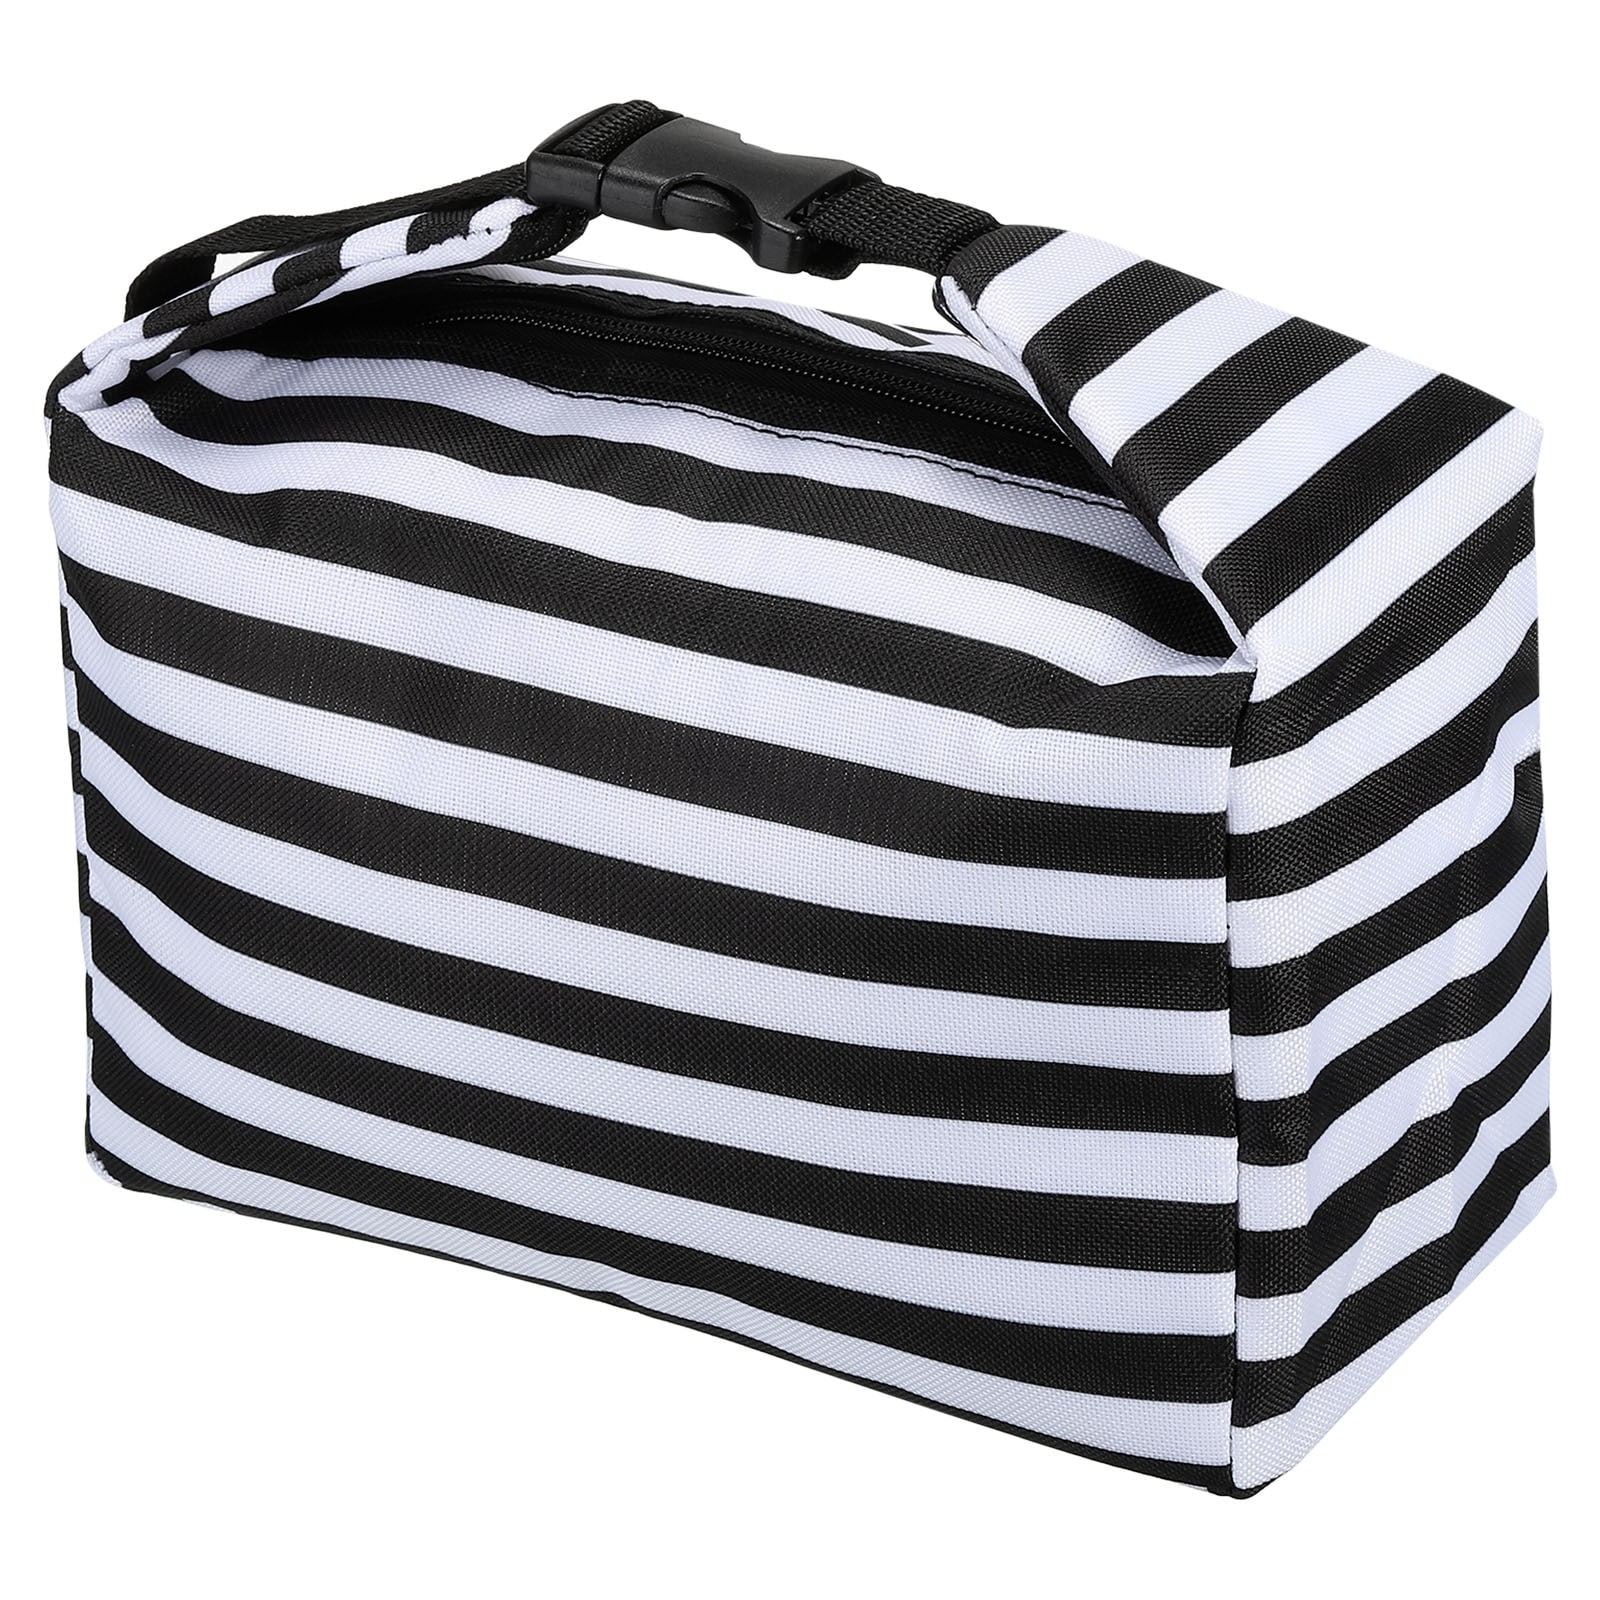 Insulated Lunch Bag, Lunch Tote Bag, 6.3"x4.33"x9.45", Black & White Stripe